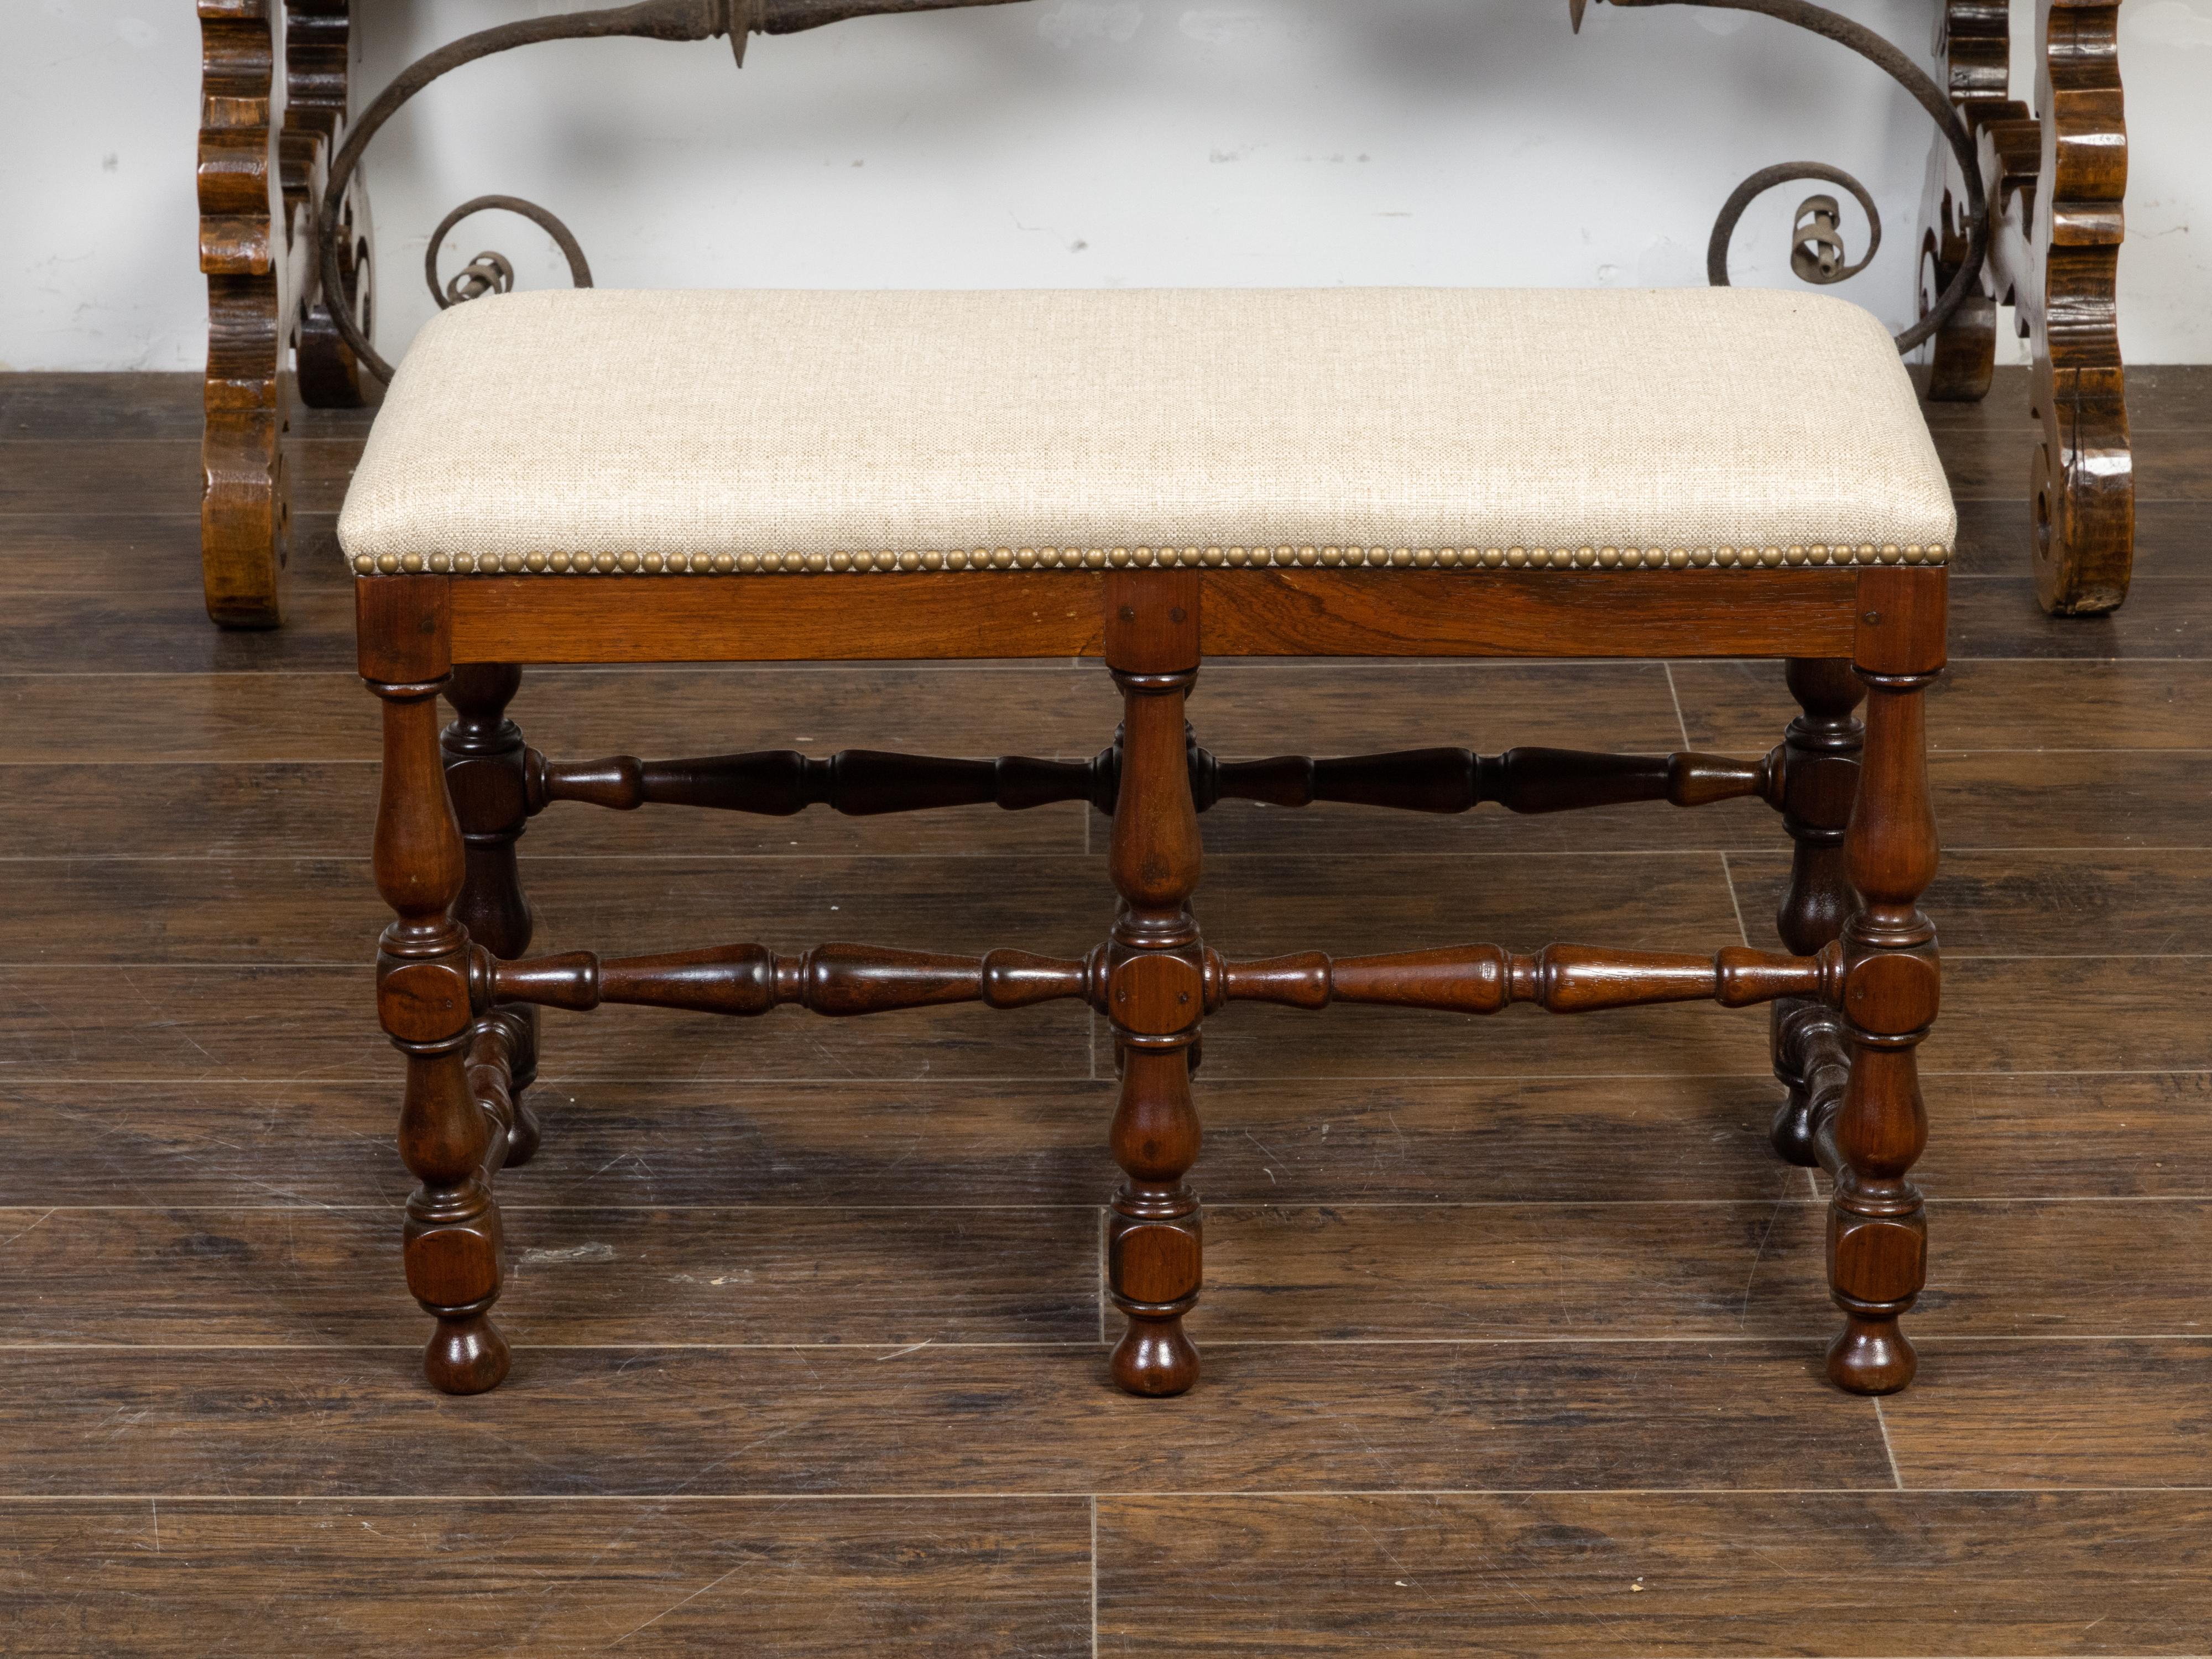 A French walnut bench from the 19th century with new linen upholstery, brass nailhead trim, turned baluster legs and cross stretchers. Created in France during the 19th century, this walnut bench features a rectangular seat newly recovered with a